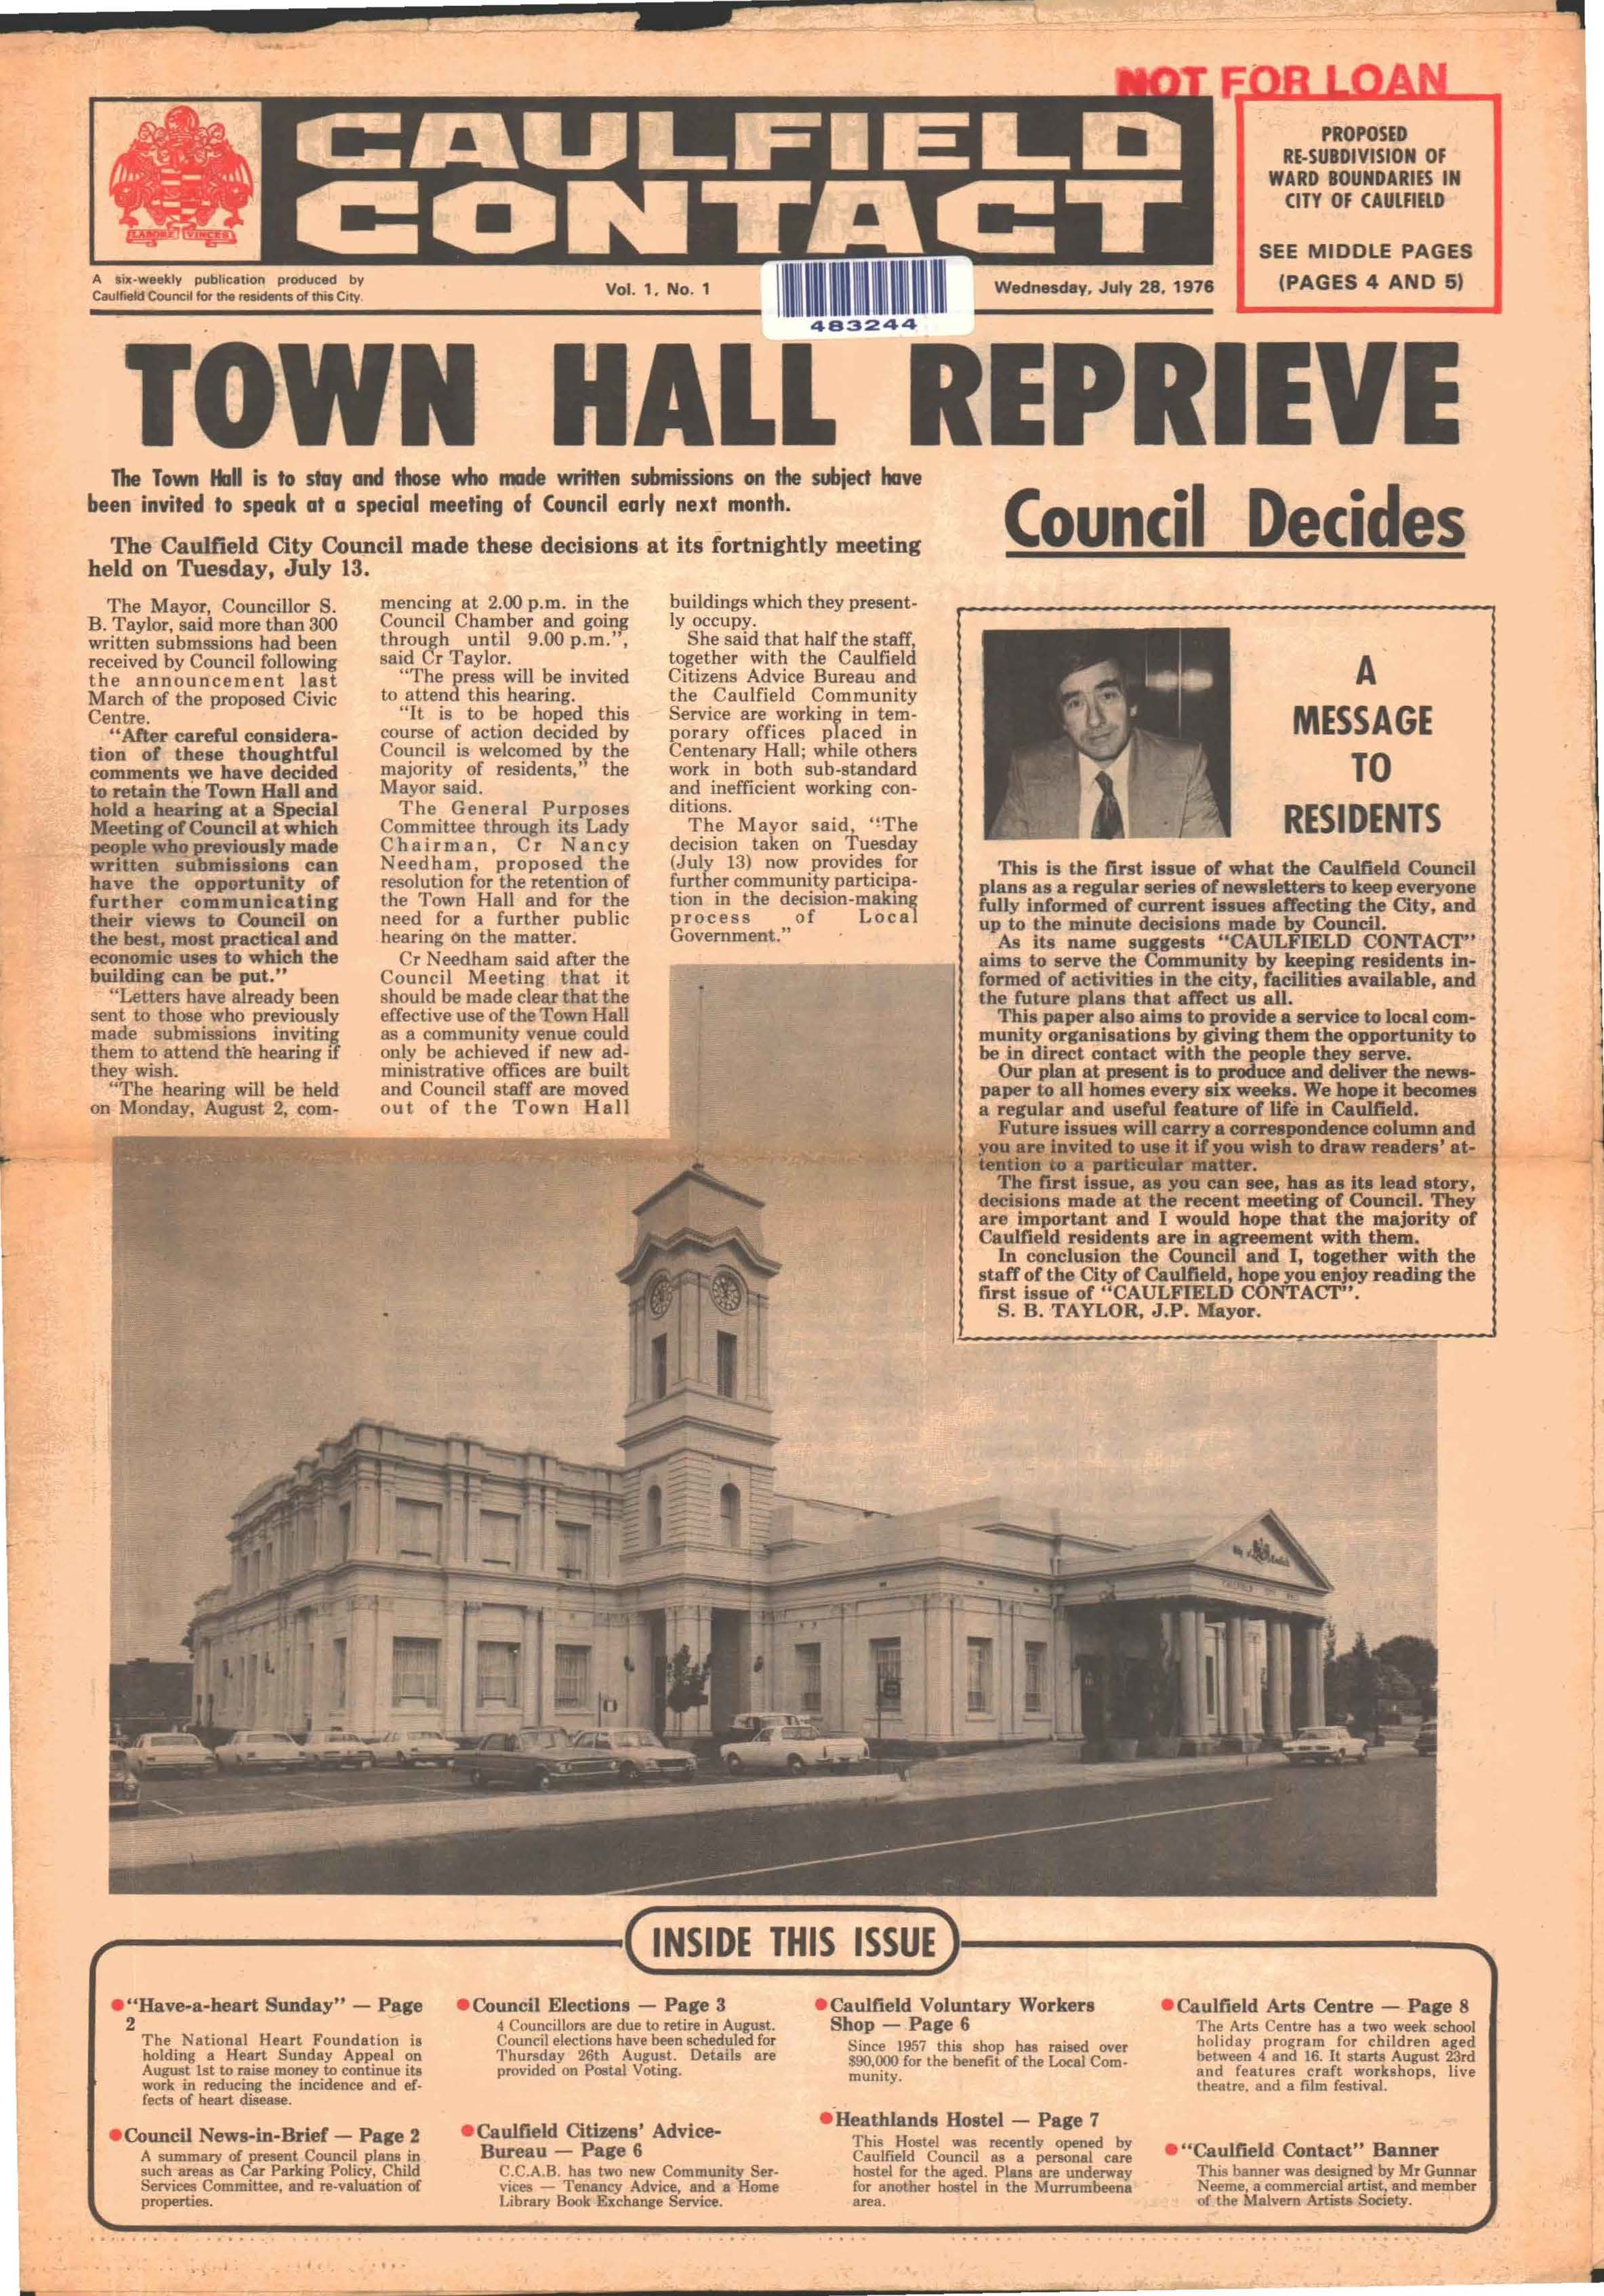 The front page of the First Edition of Caulfield Contact from 1976. Glen Eira City Council History and Heritage Collection.